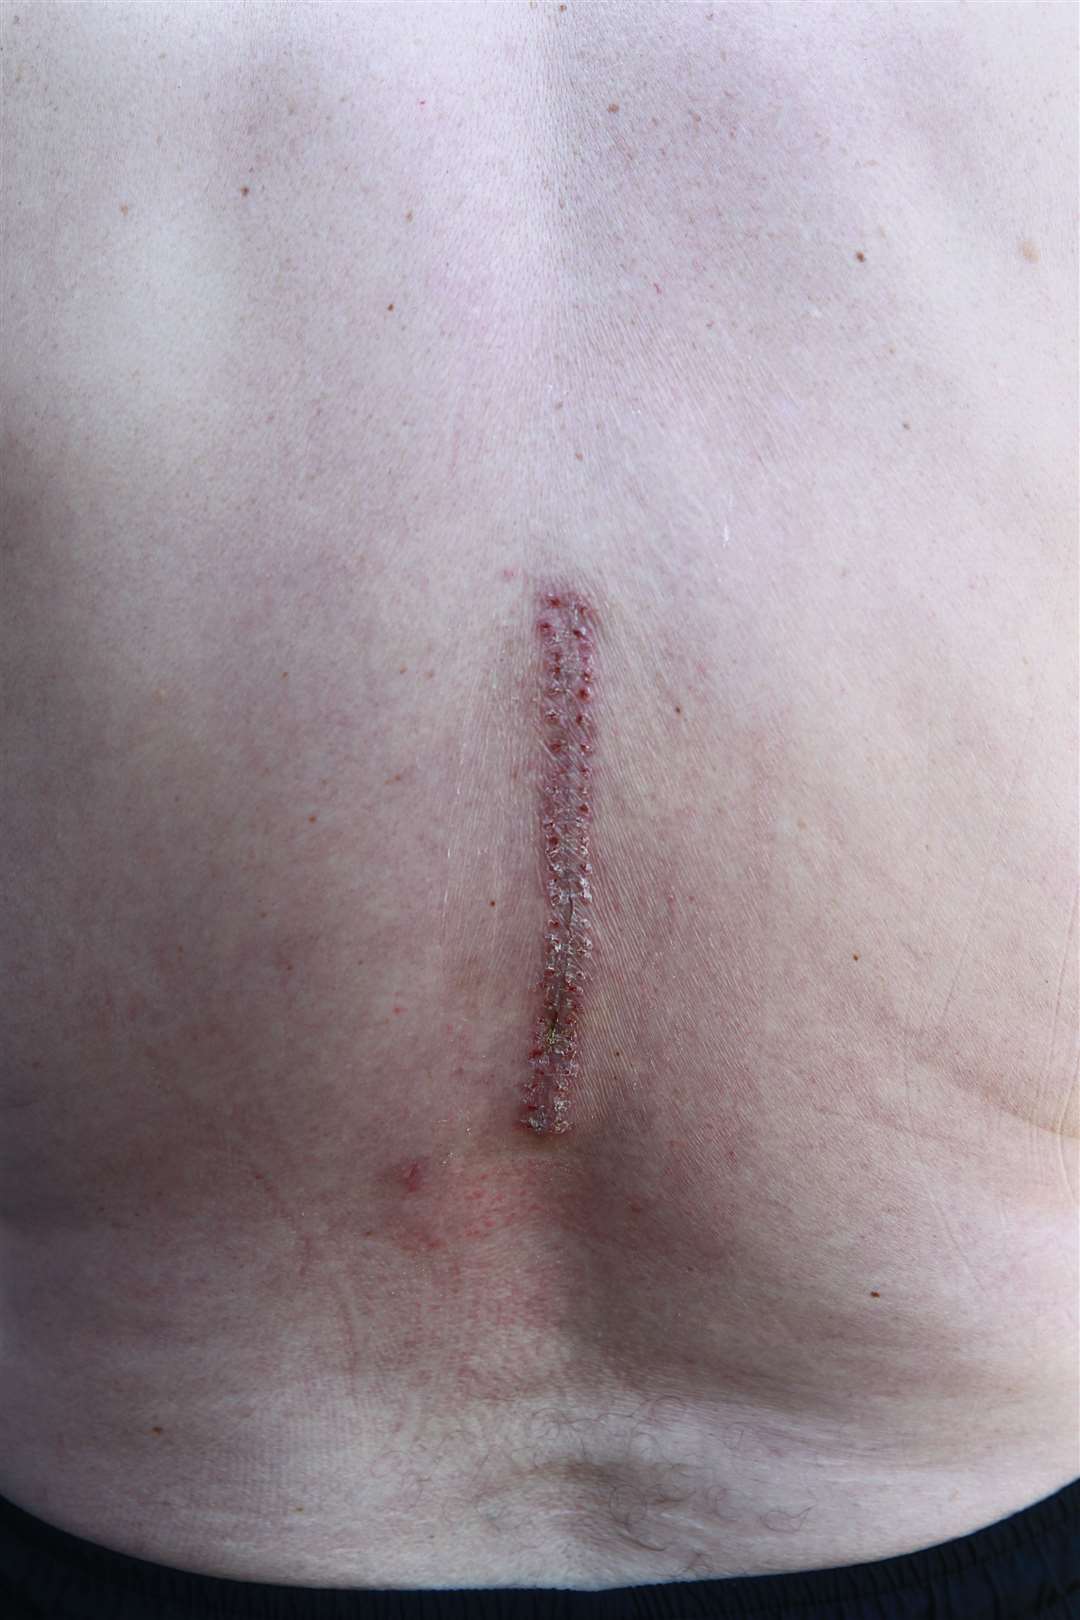 Stephen Meekins has been left with this scar after the surgery on his vertebrae. Picture: John Westhrop (14188898)